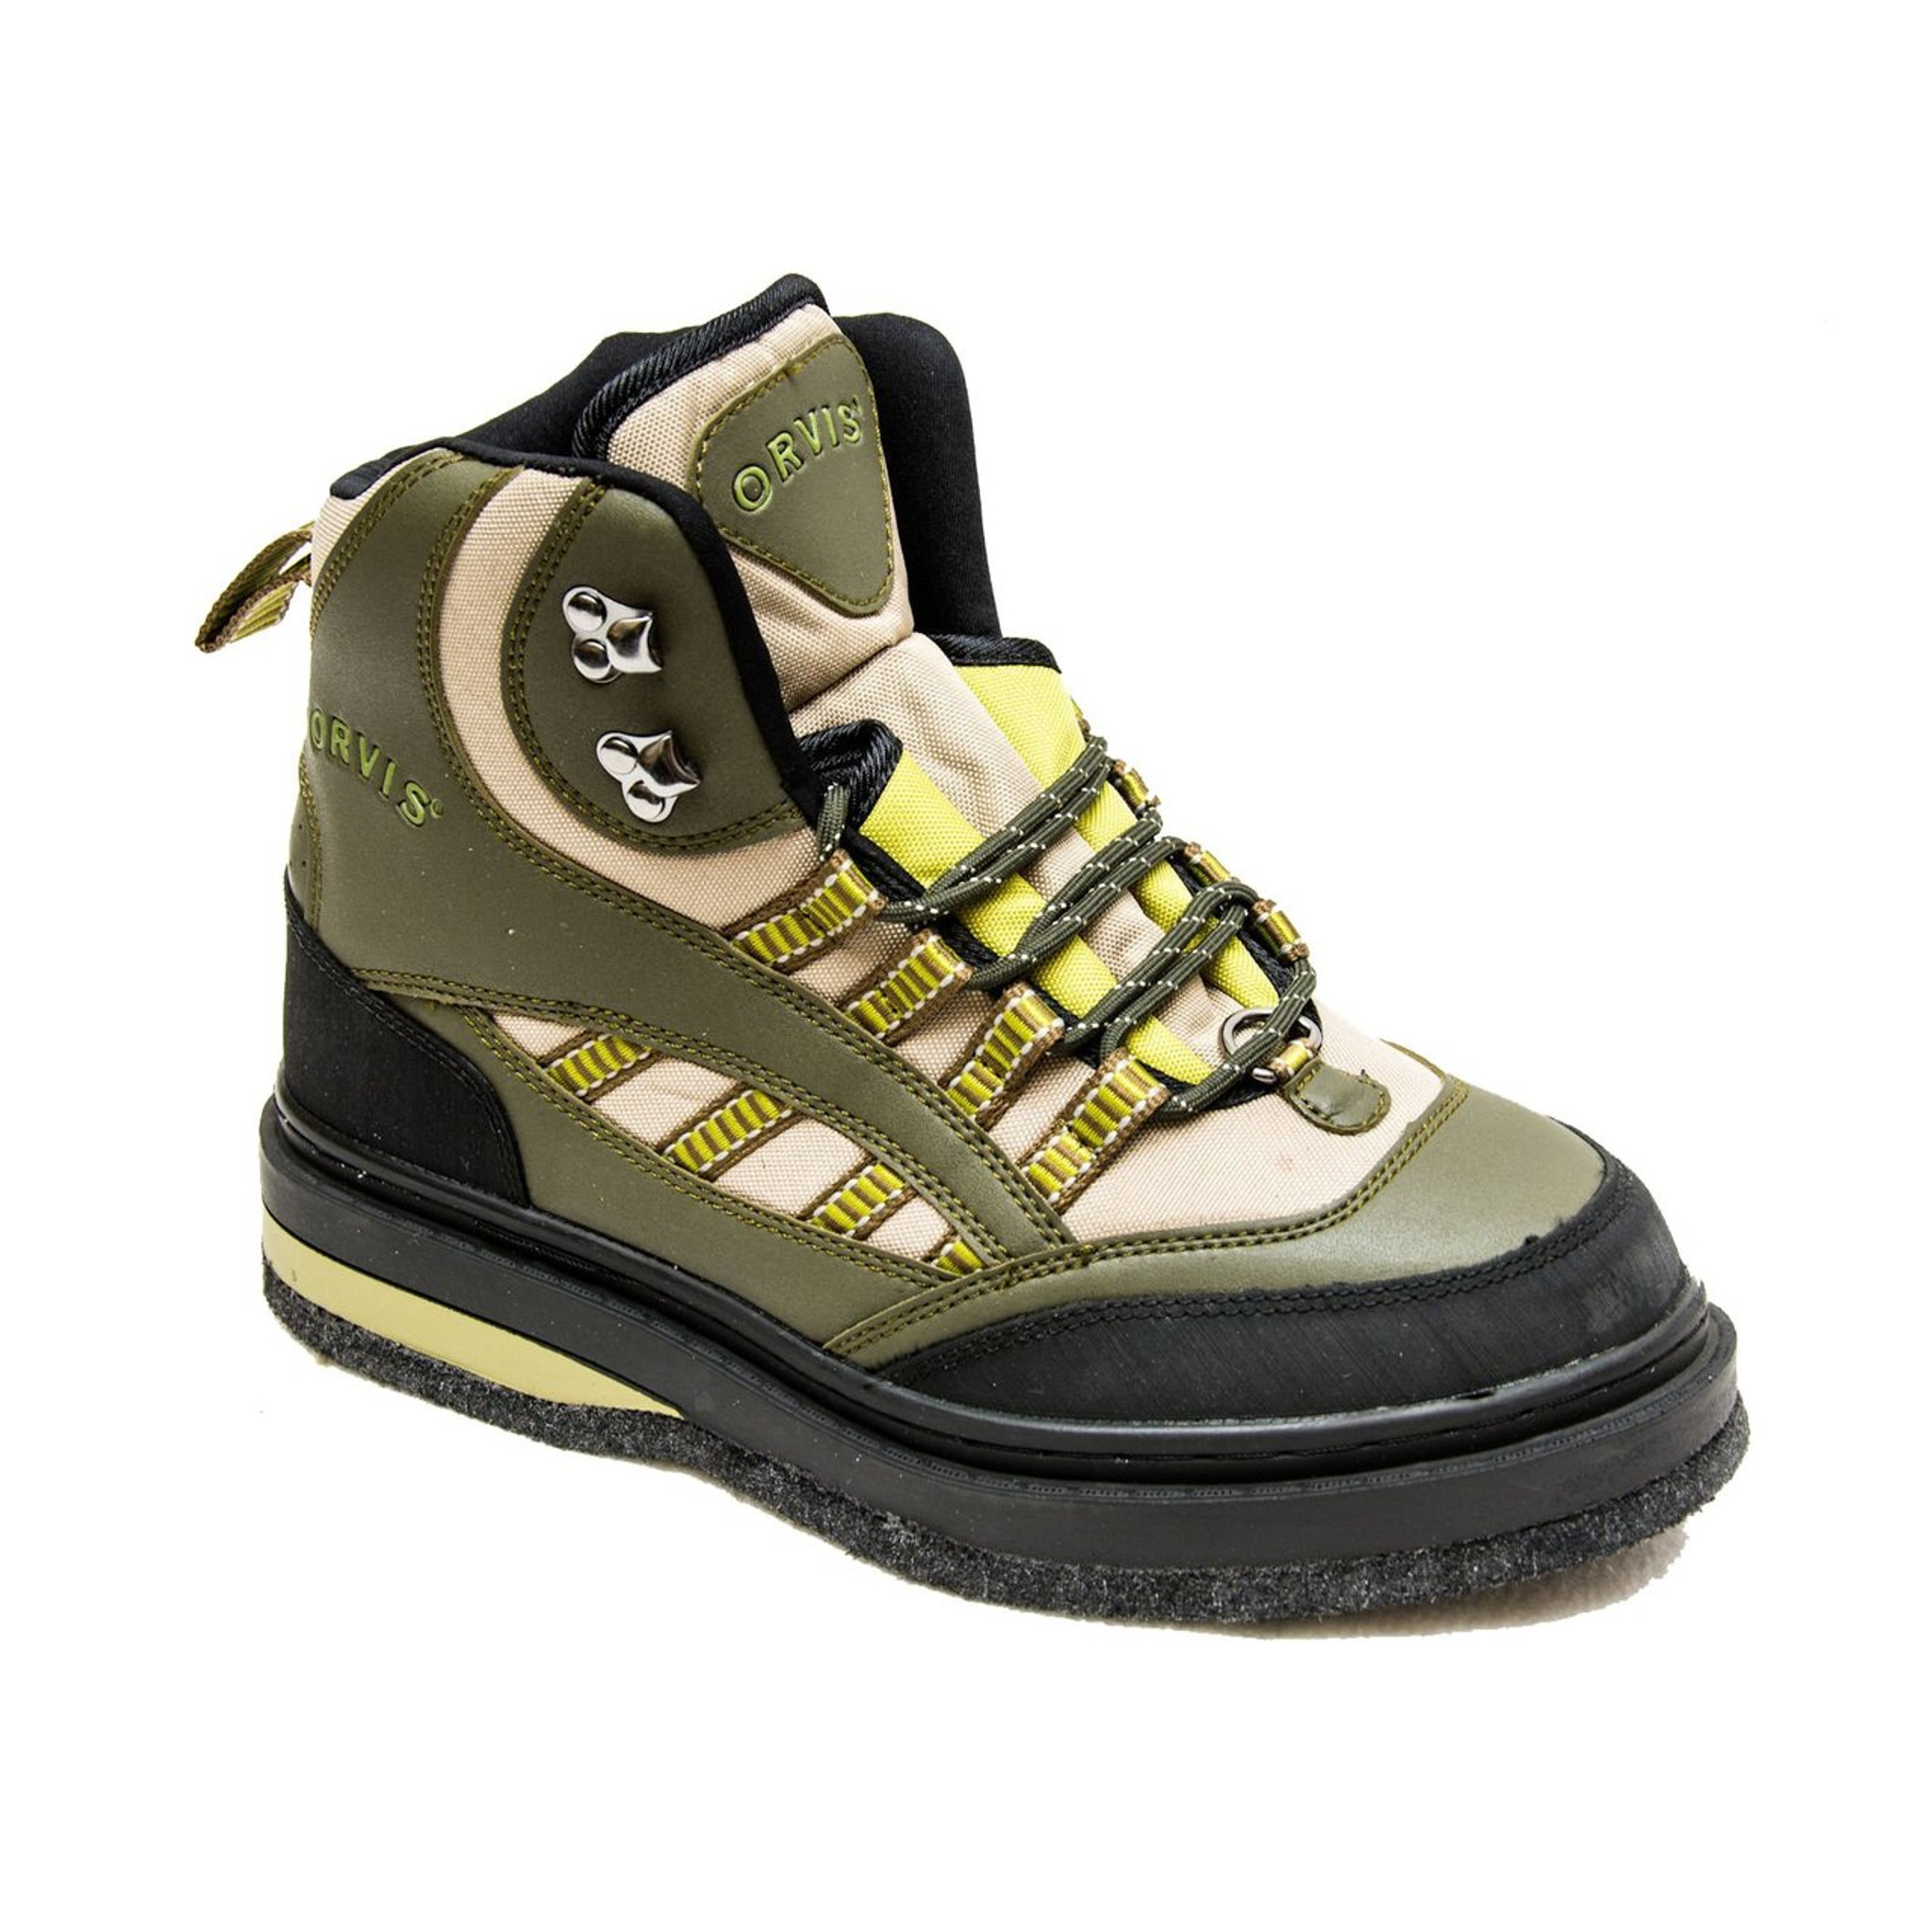 Orvis Women's Encounter Wading Boot - FlyMasters of Indianapolis